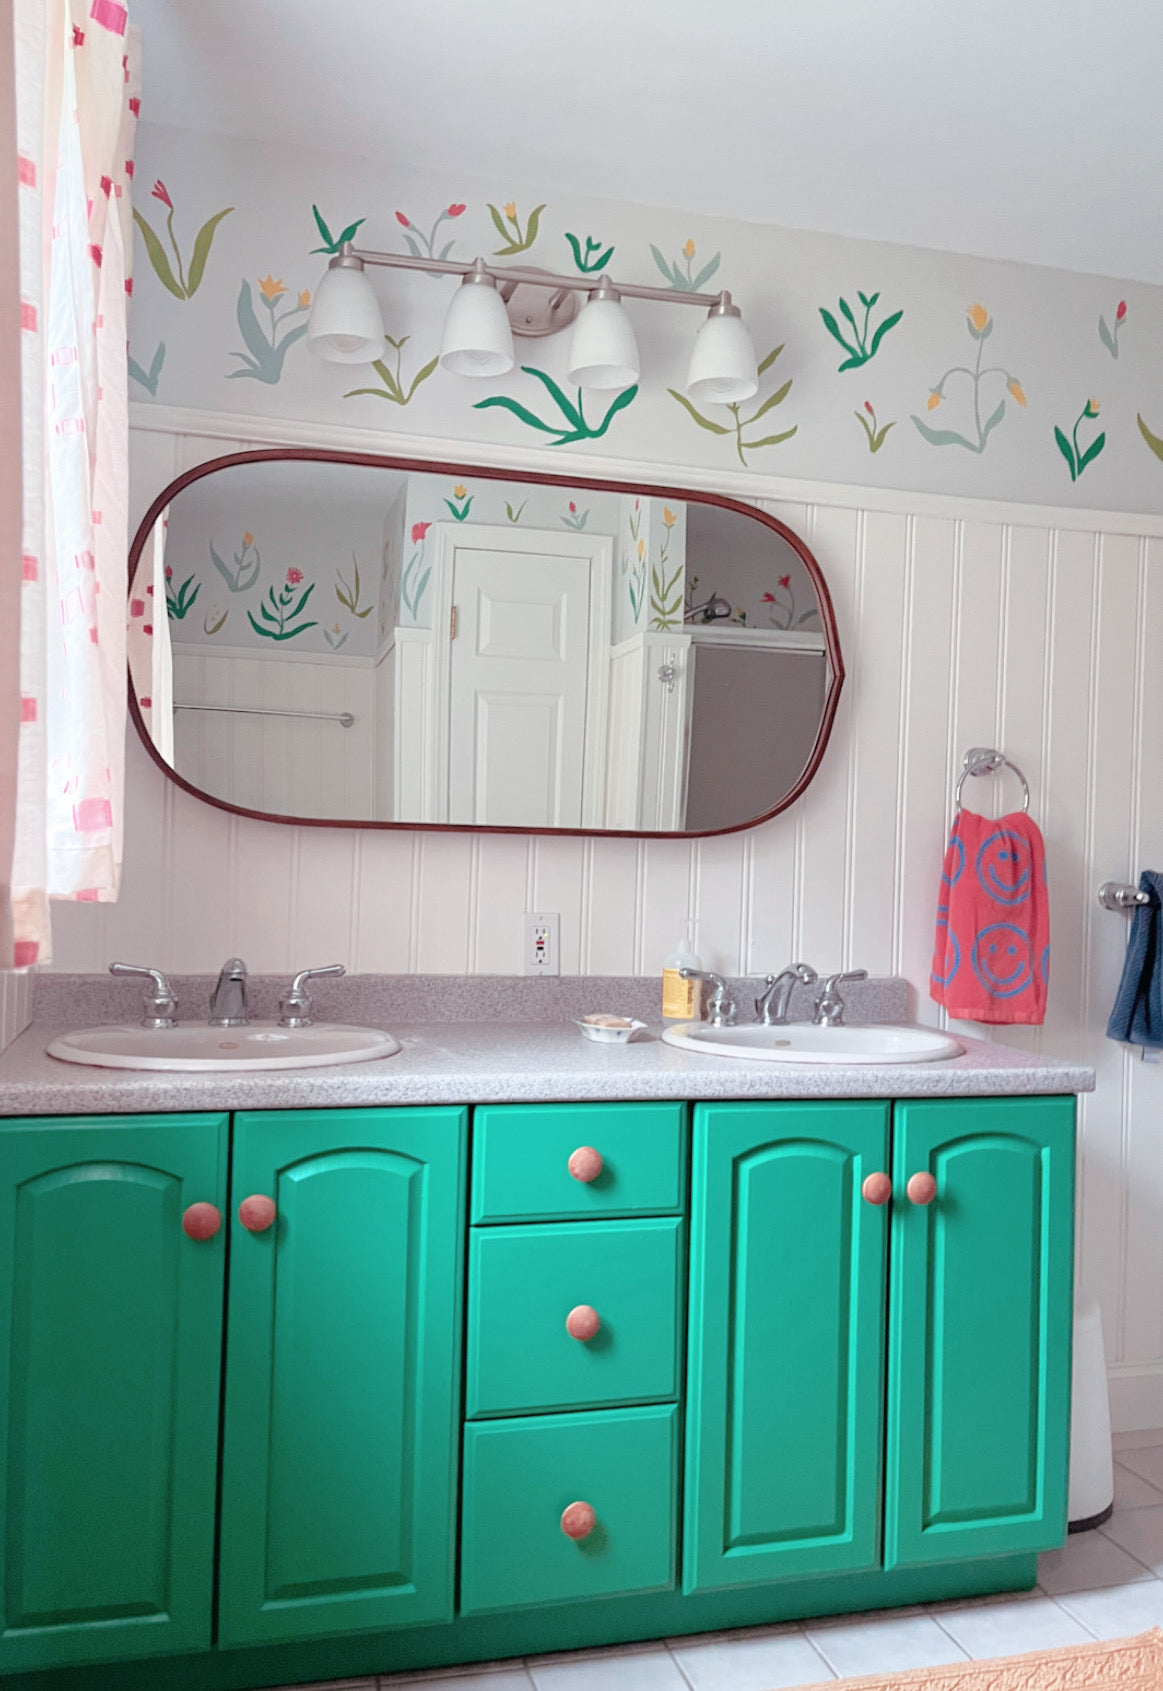 Bathroom Mural and Vanity Makeover